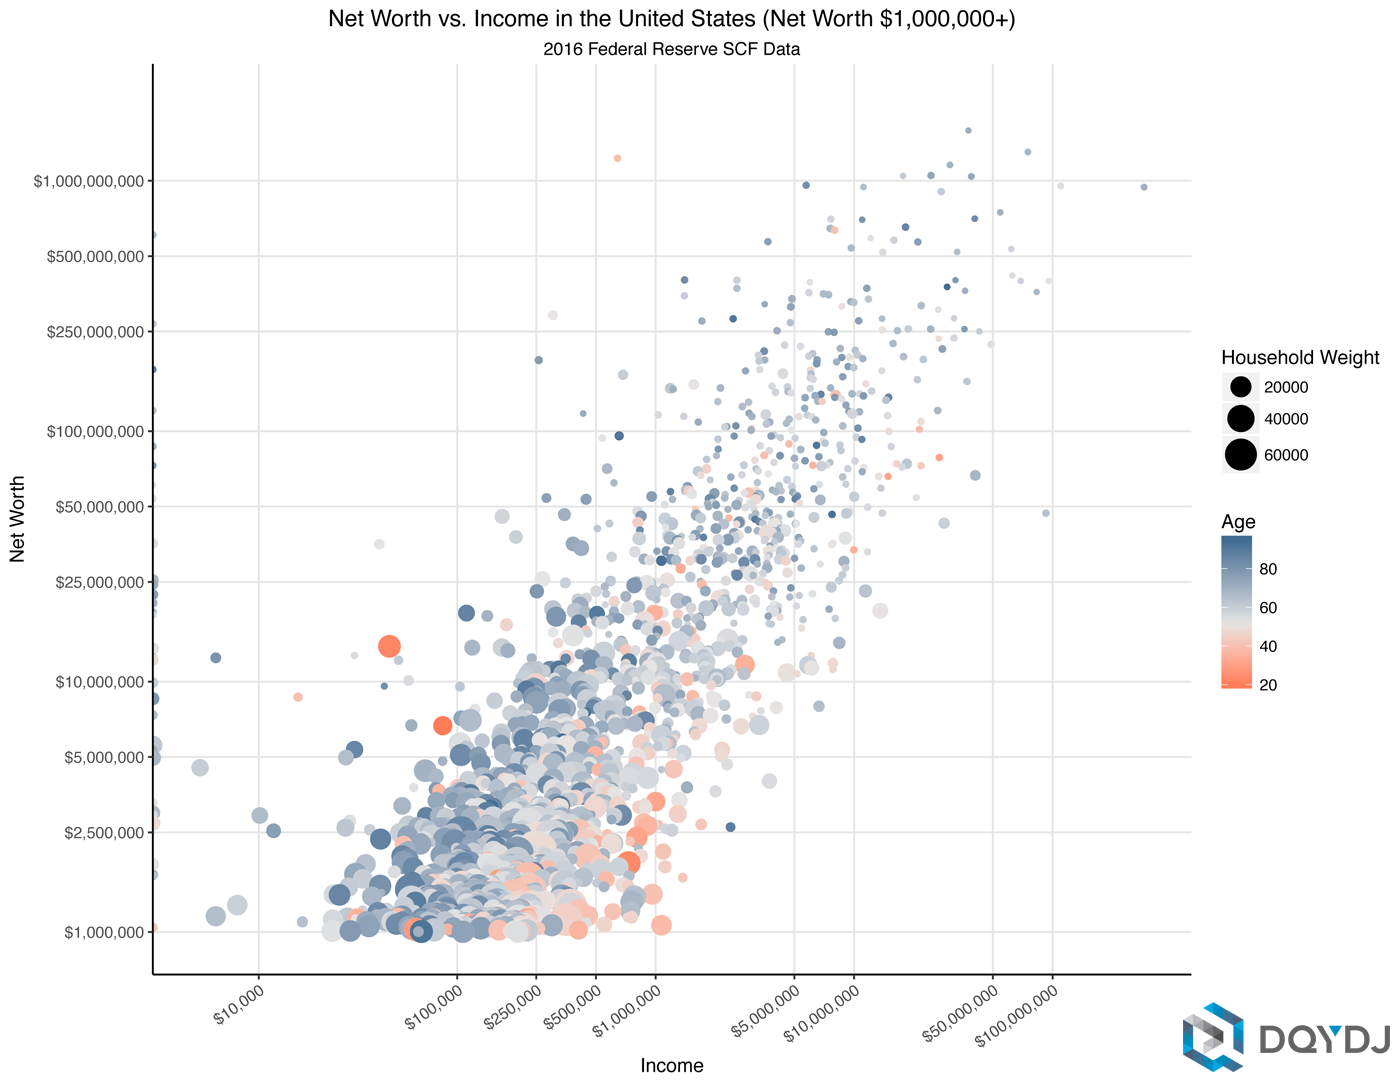 Correlation of Income and Net Worth for the Upper Middle Class measured by net worth over $1,000,000